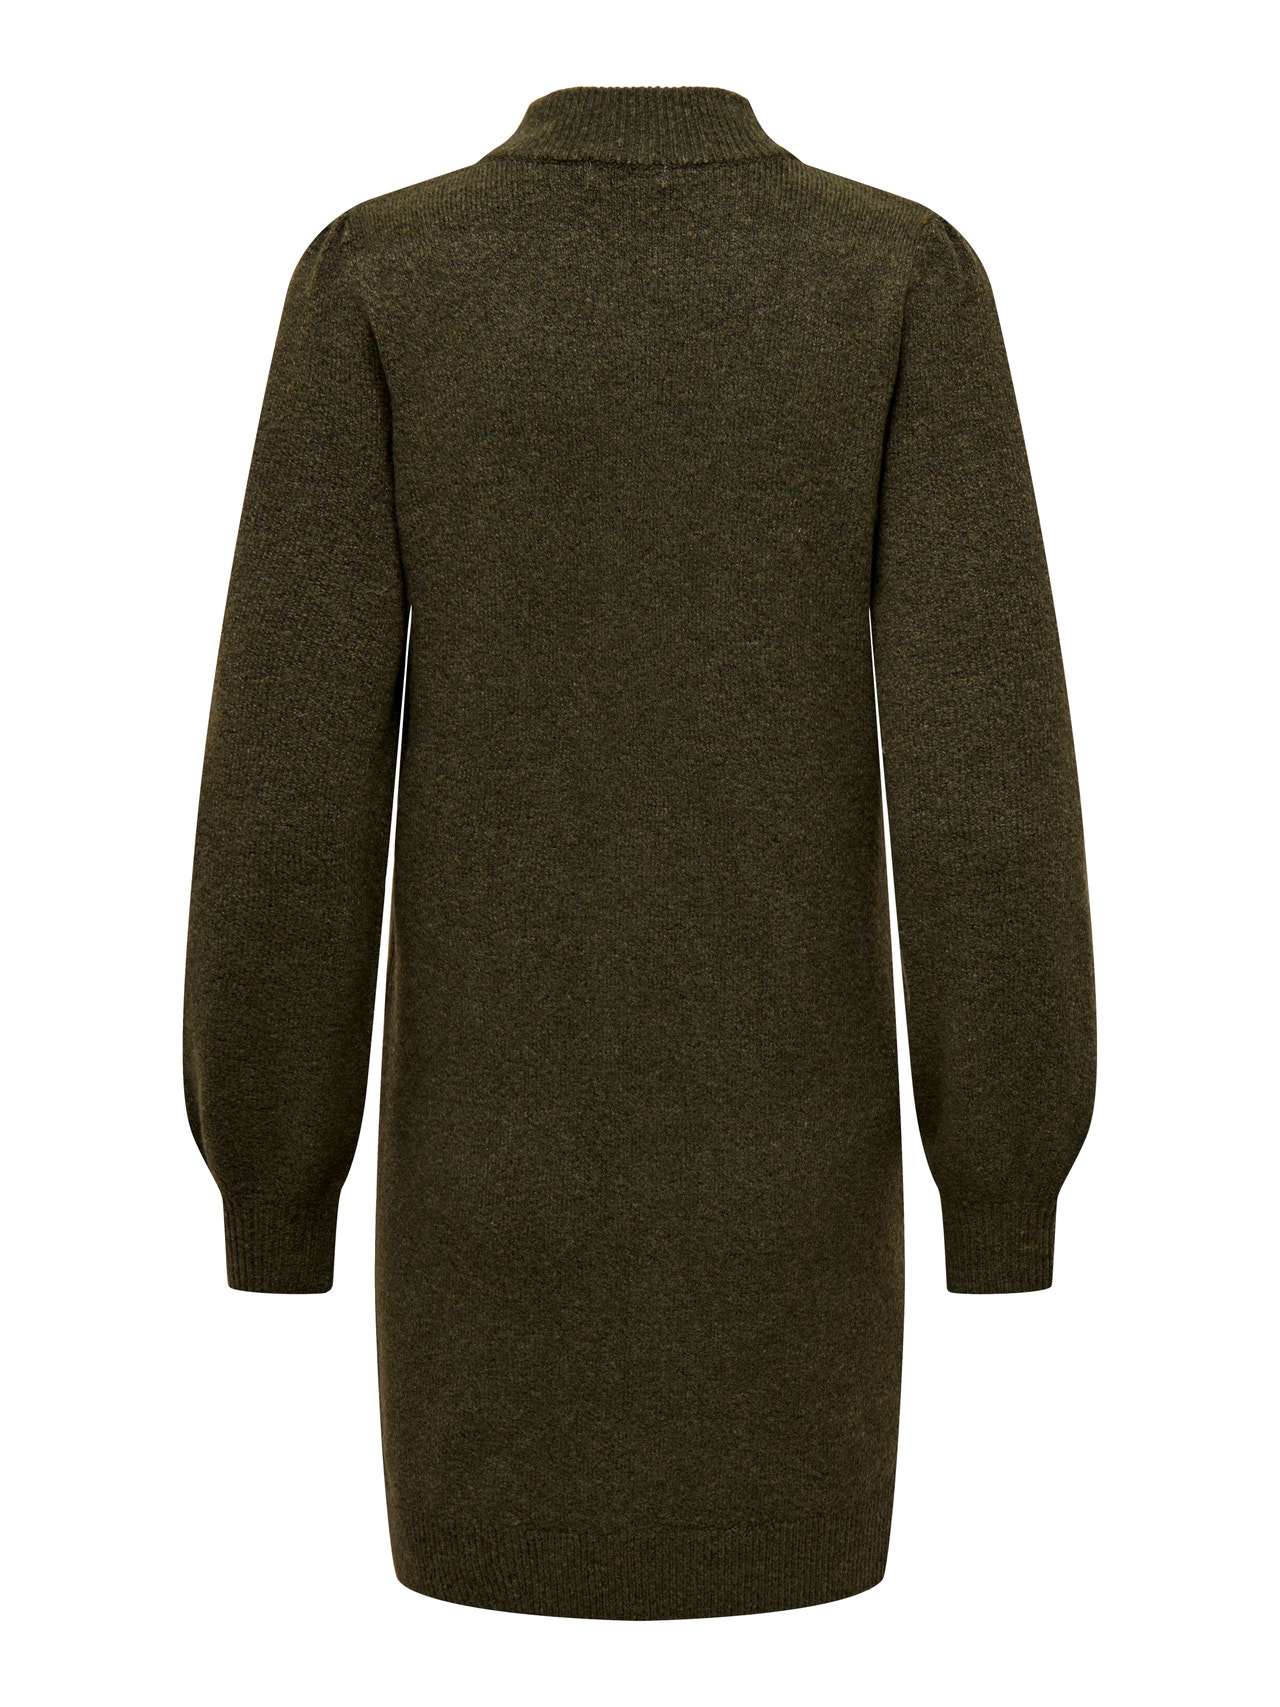 ONLY High neck Knitted Dress -Dark Olive - 15238237